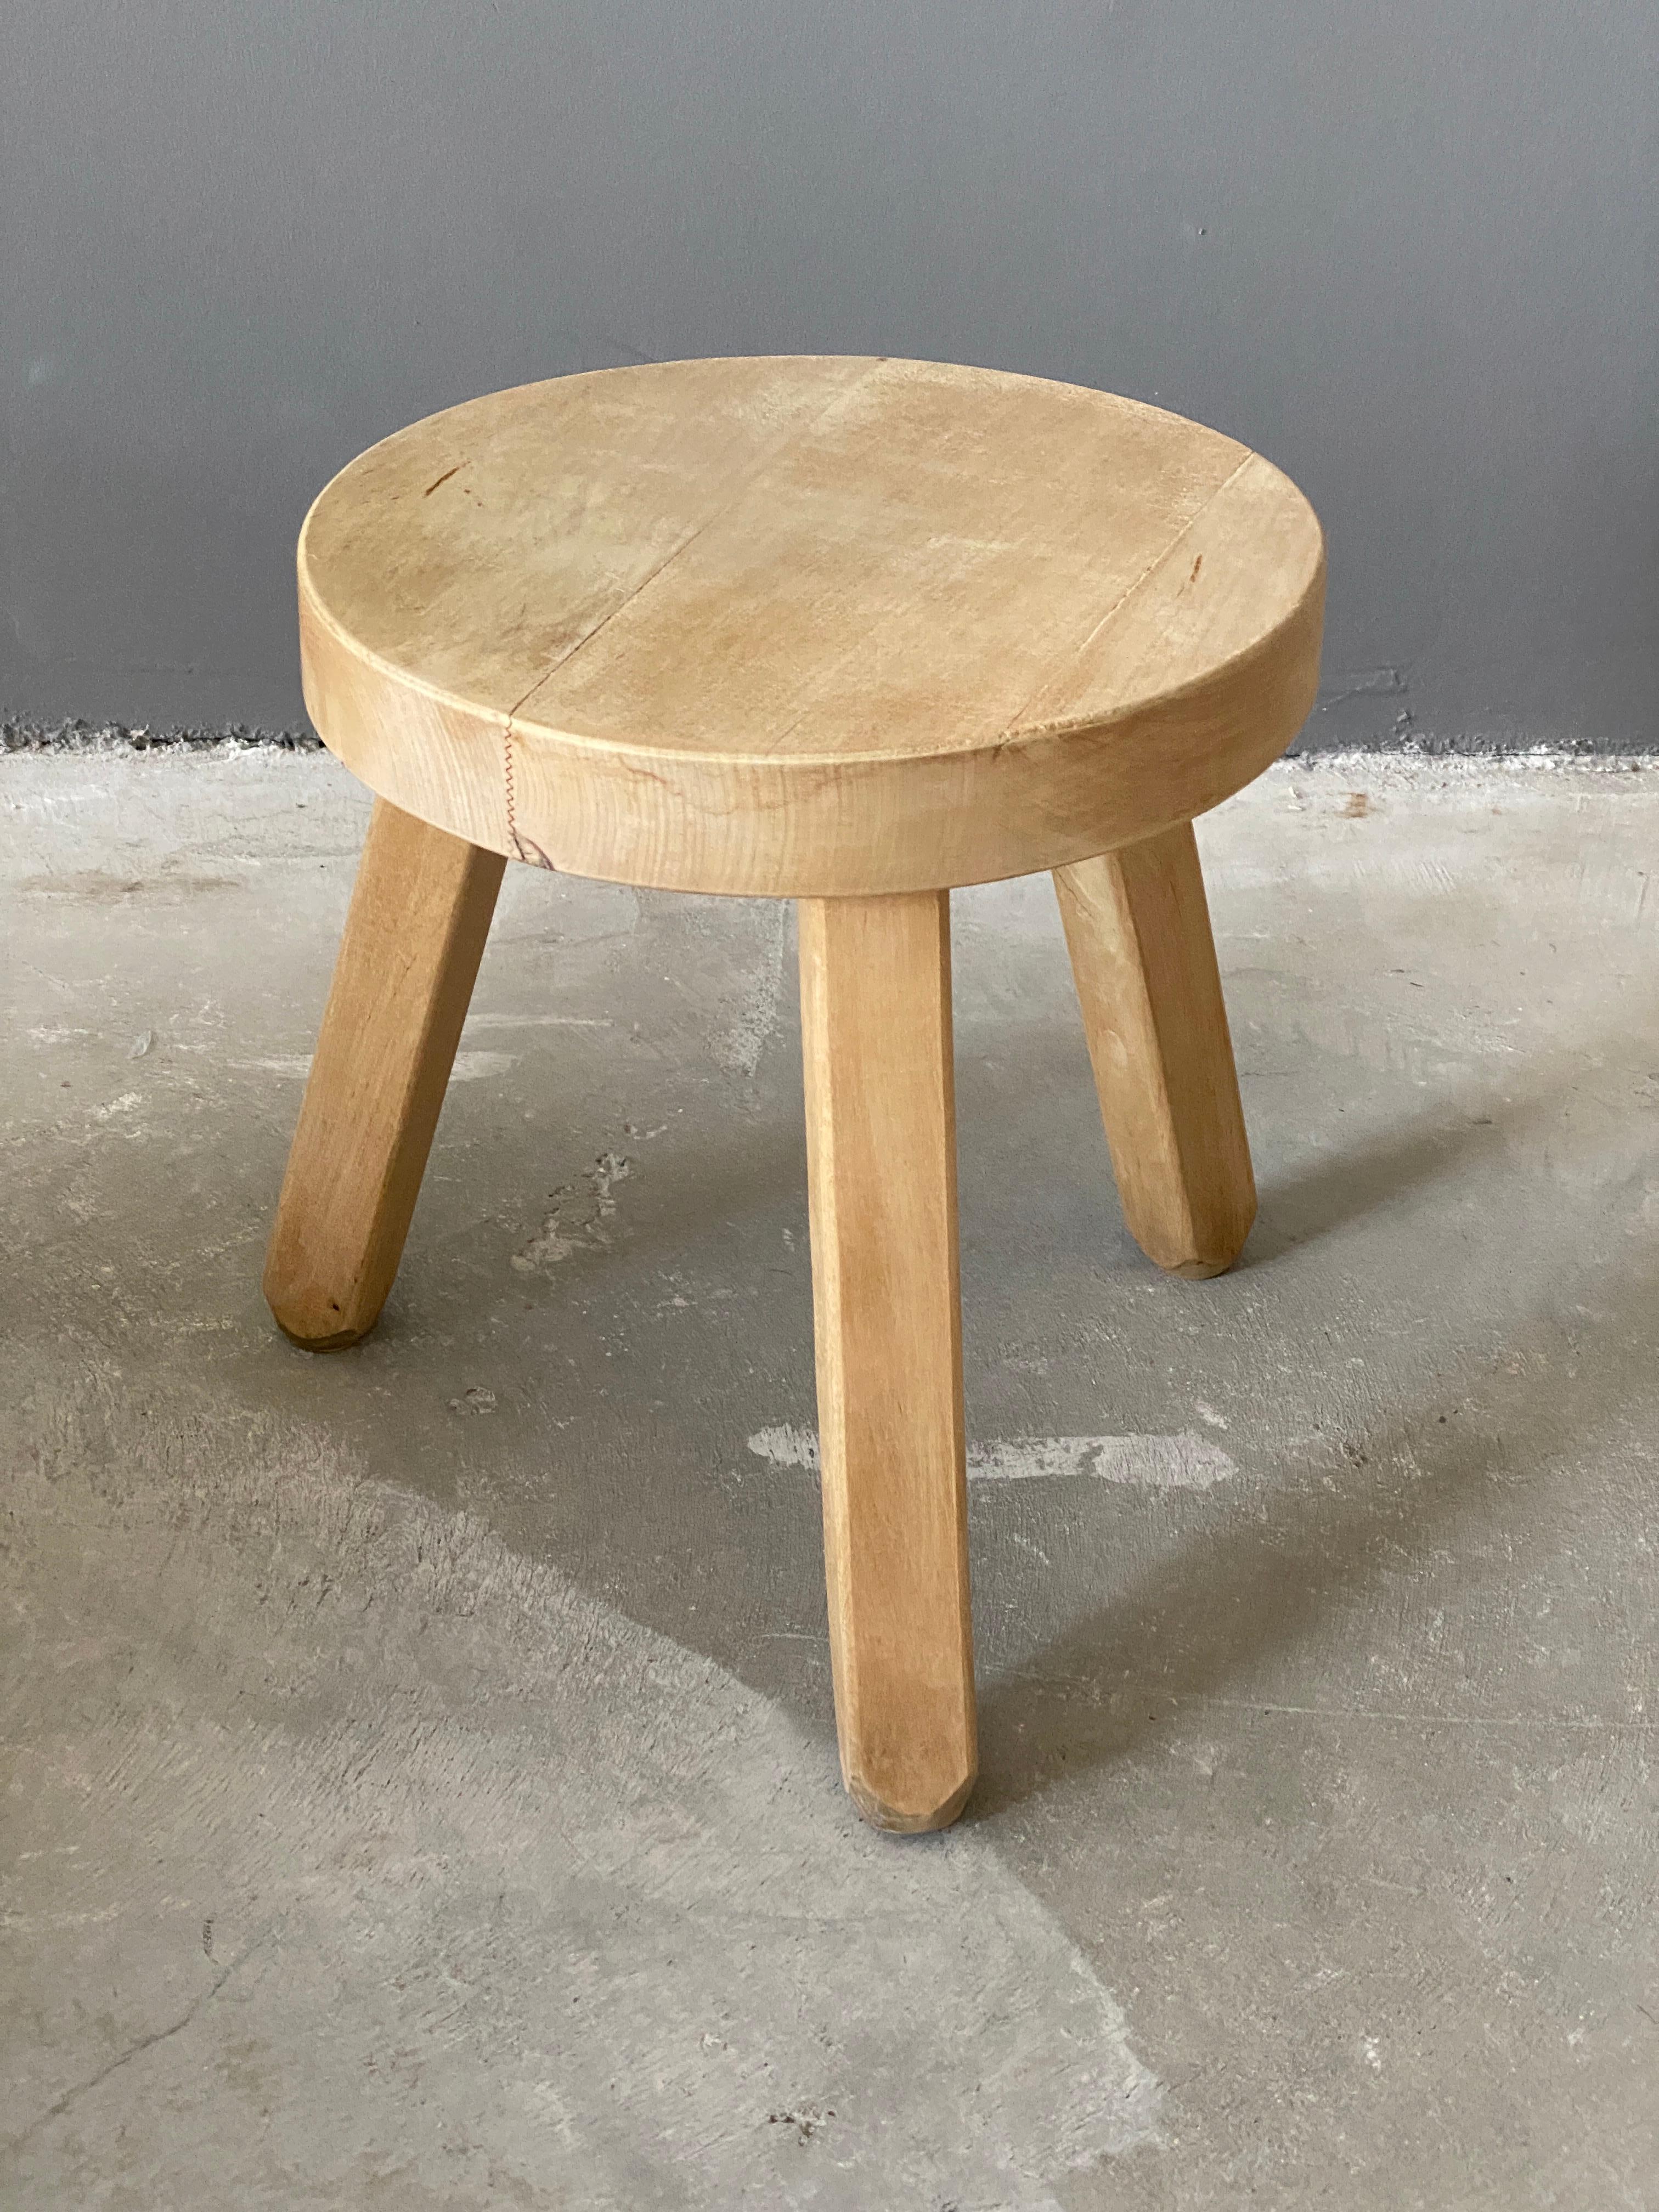 A Handmade Minimalist stool, designed and produced in Sweden, 1970s. In finely sculpted solid oak. 

Other designers of the 20th century working in pine include Charlotte Perriand, Lisa-Johansson Pape, Pierre Chapo, and Axel Einar Hjorth.